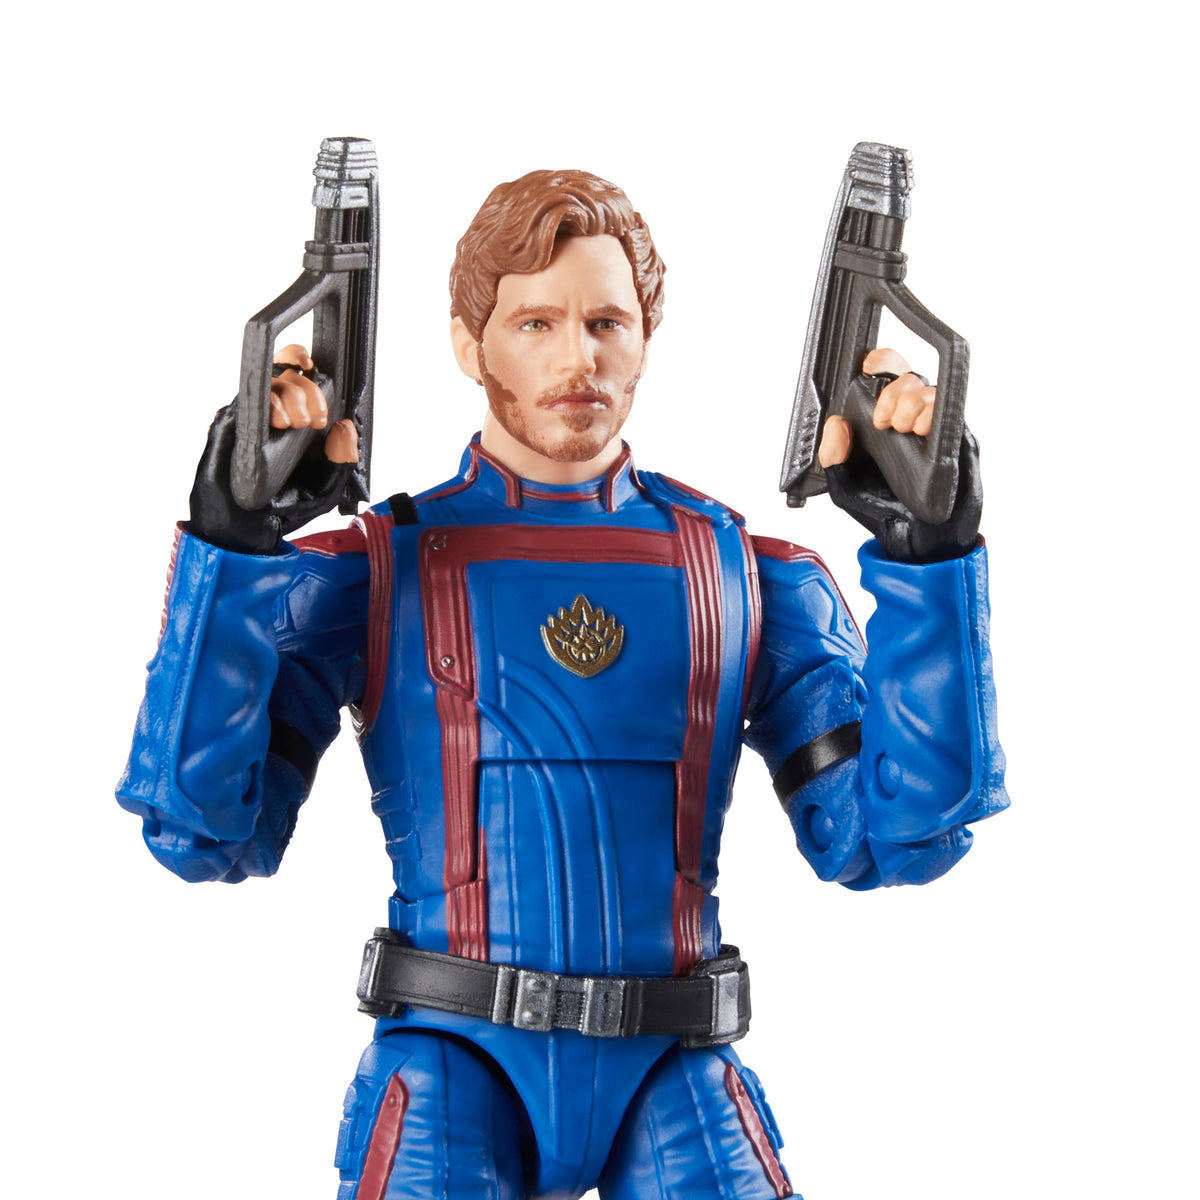 Marvel Guardians of the Galaxy Legends Series Star-Lord Action Figure